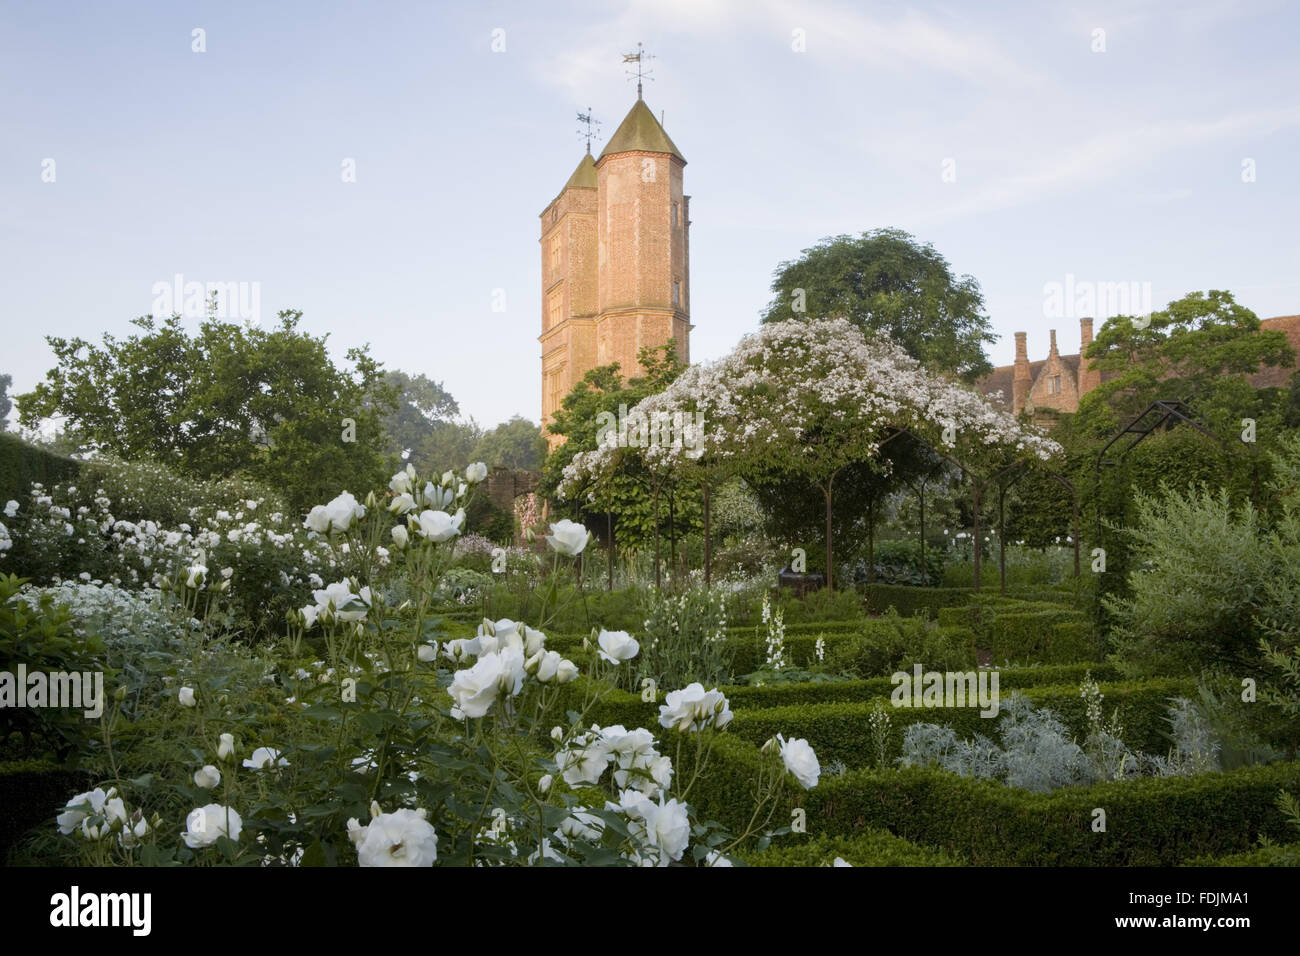 The White Garden in summer, with the Elizabethan Tower in the distance at Sissinghurst Castle Garden, near Cranbrook, Kent. Stock Photo